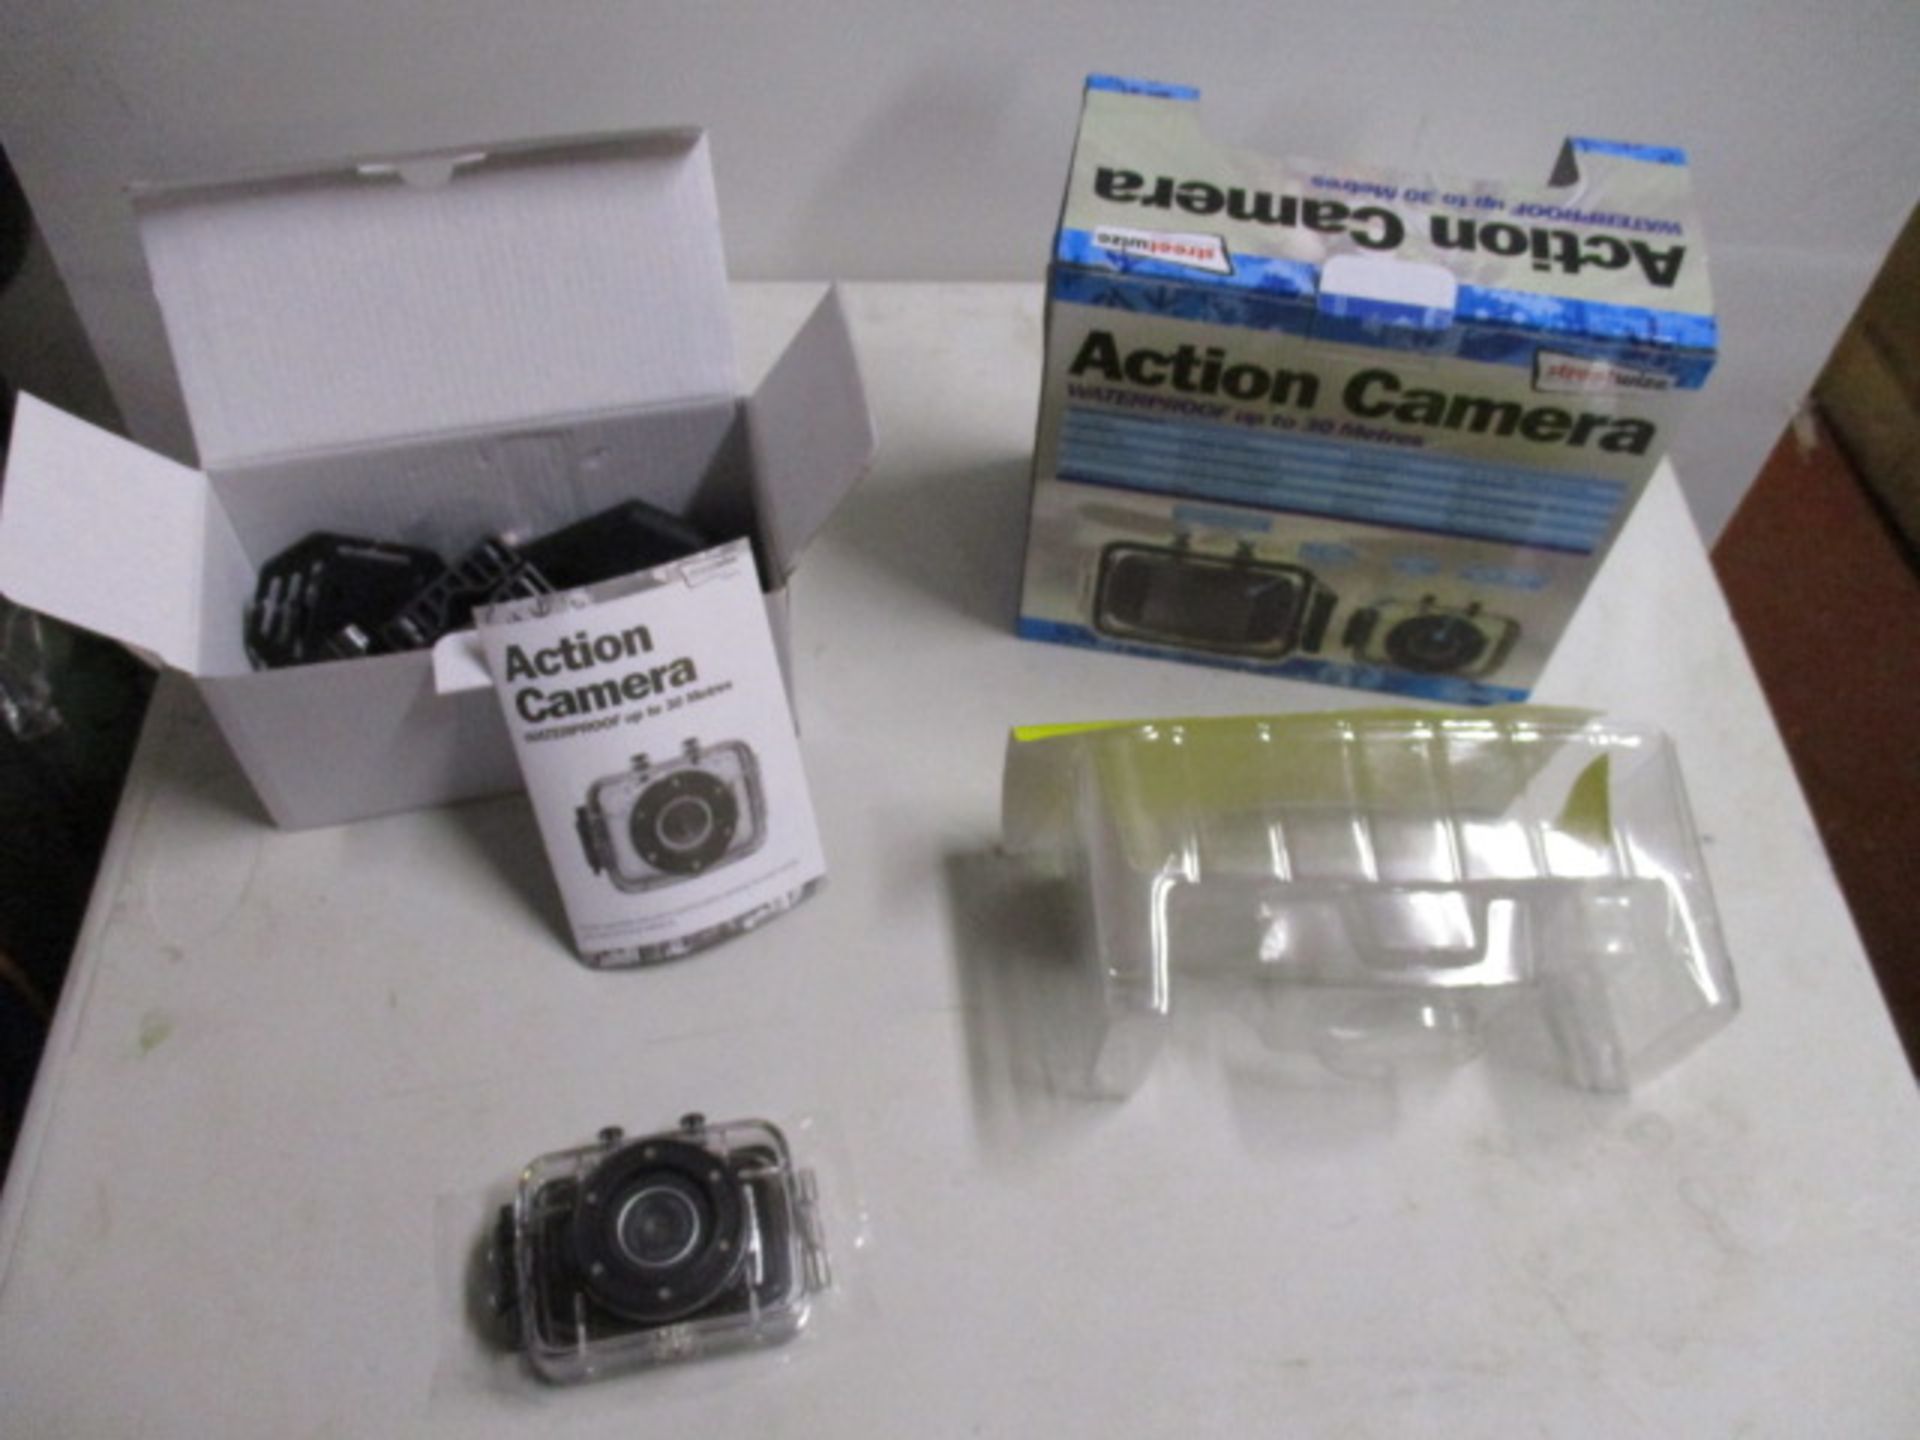 Streetwize waterproof Action Camera upto 30 metres boxed and complete with accessories looks unused - Image 2 of 3